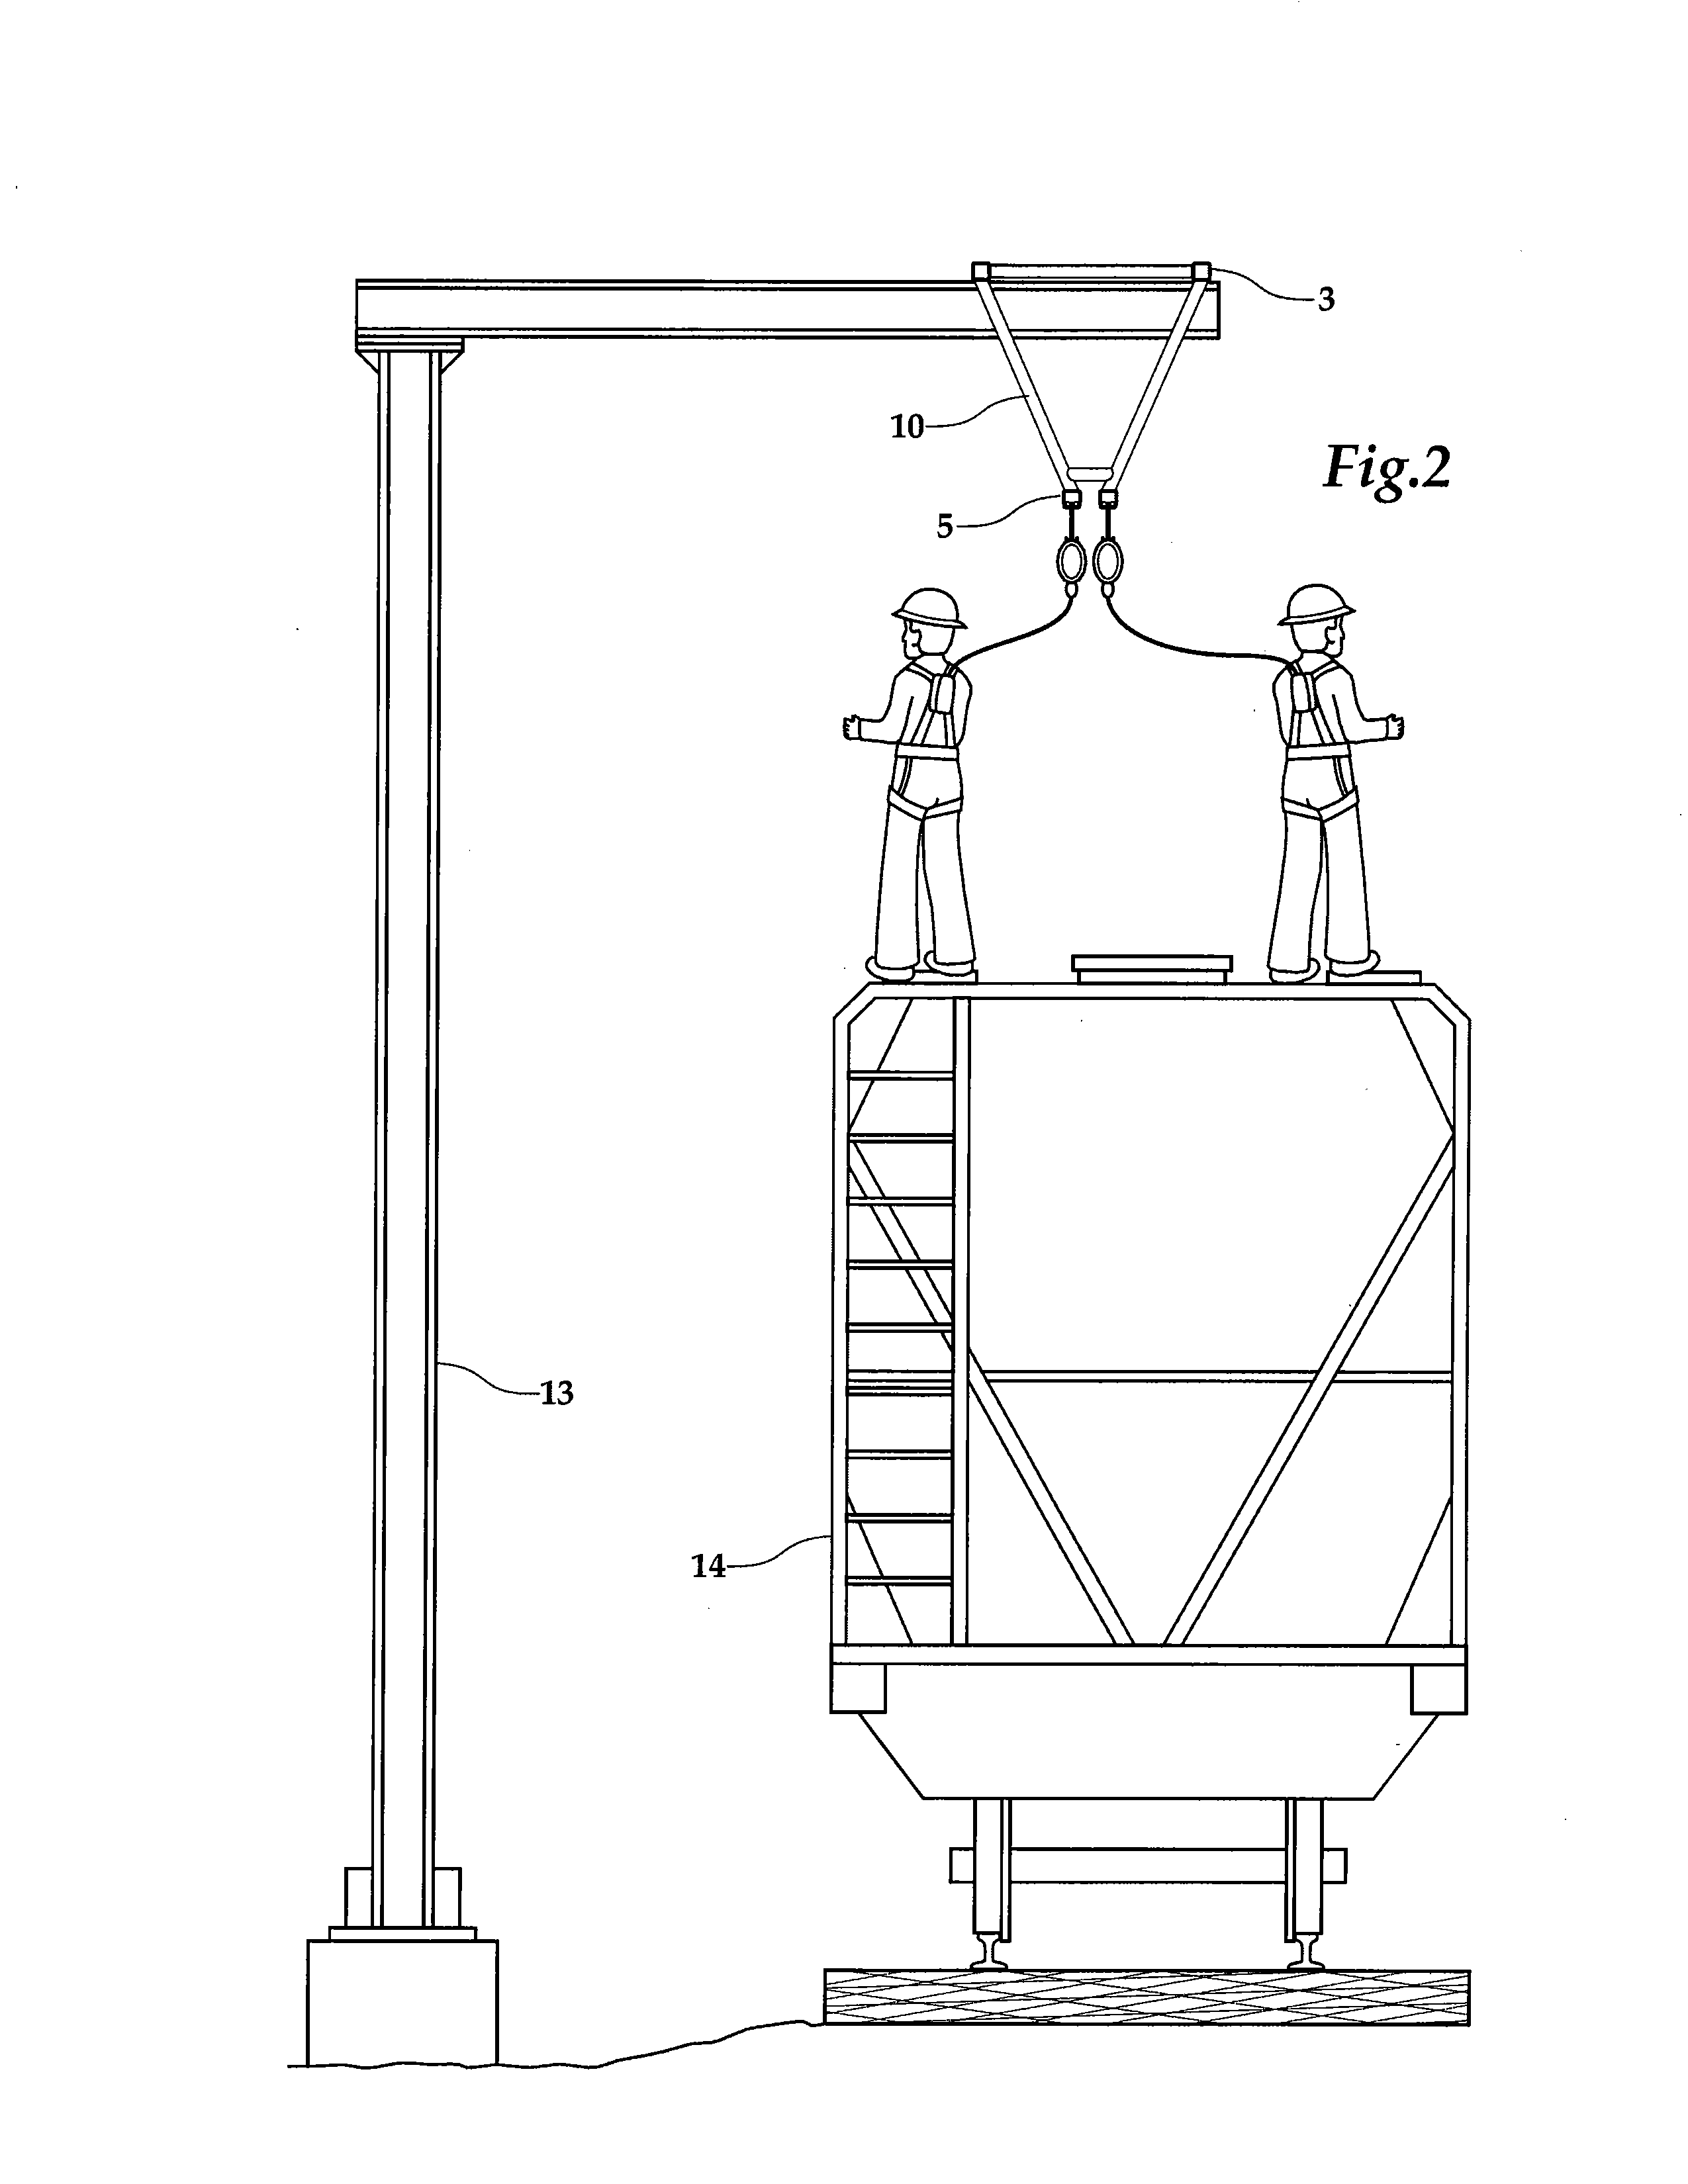 Enclosed track system for a fall protection system